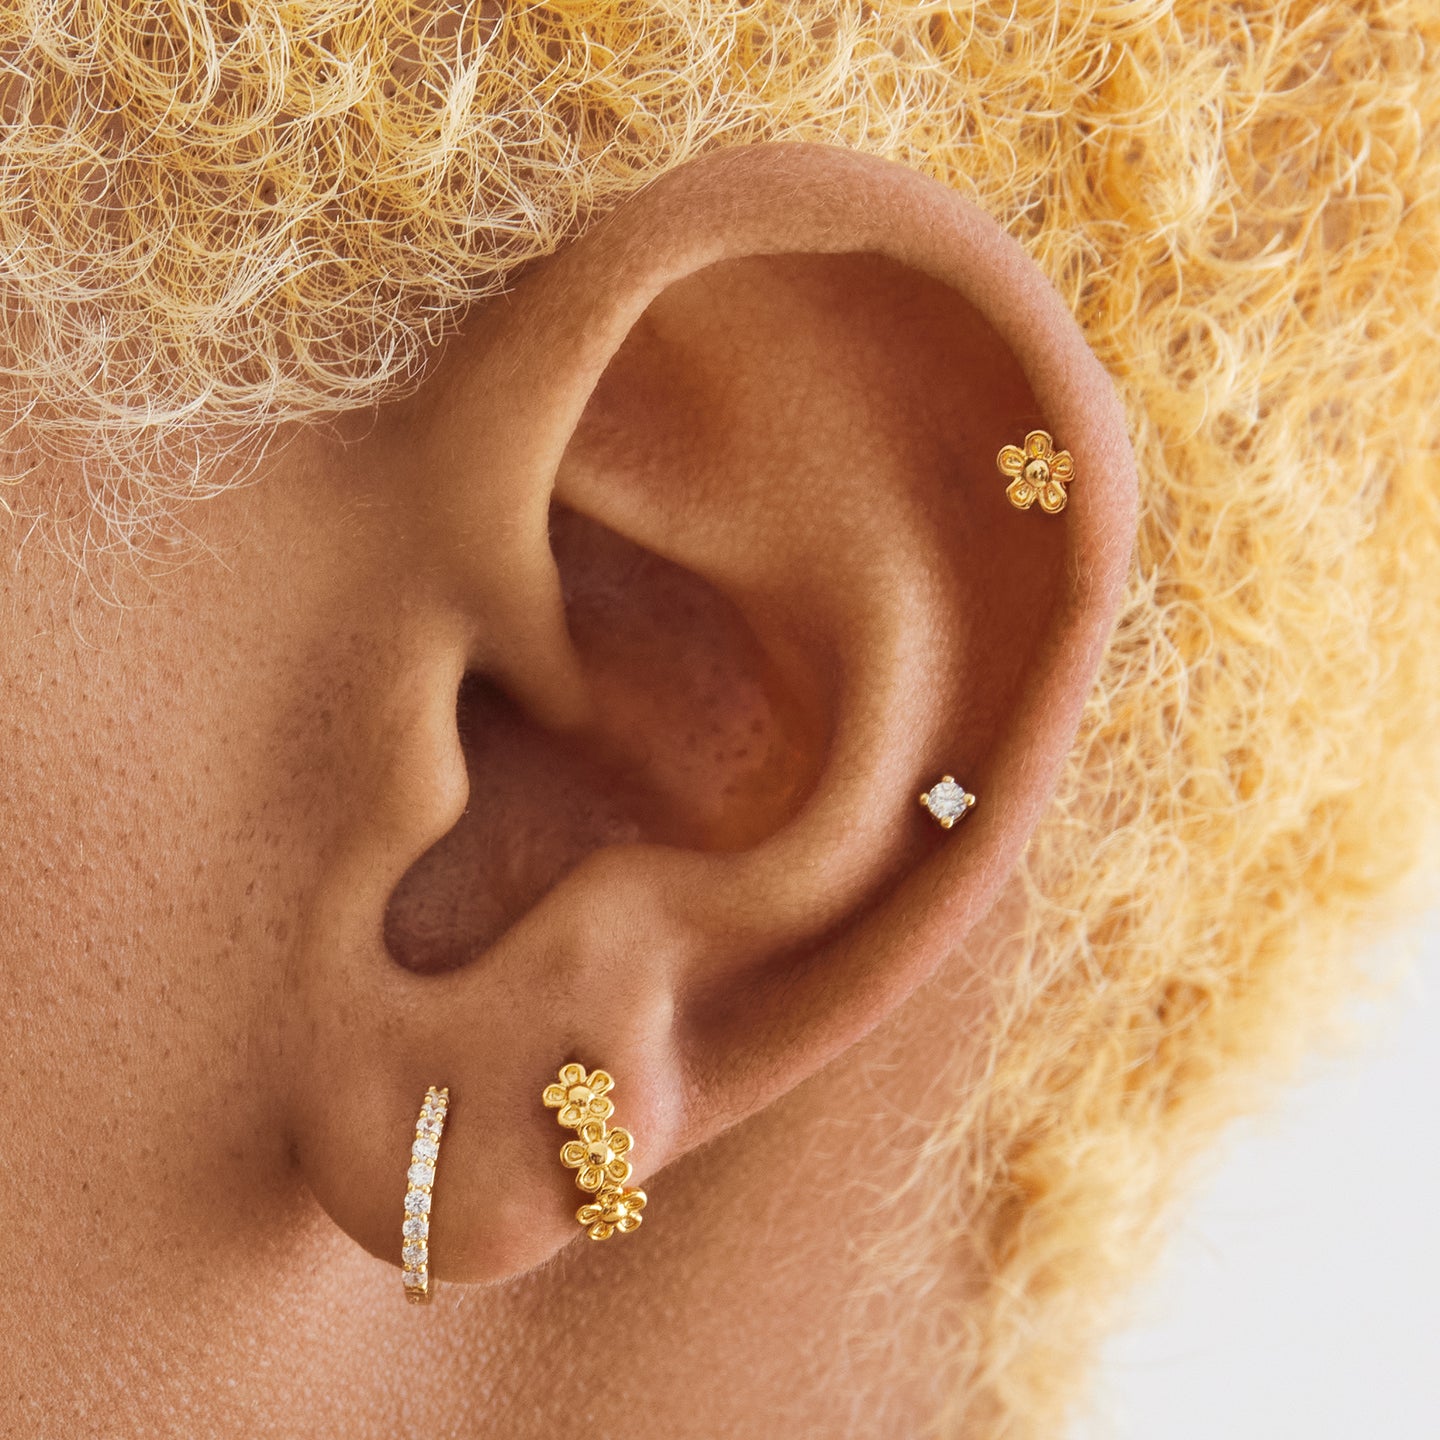 This is three small gold daisy-shaped flowers on a micro huggie on ear [hover] color:null|gold